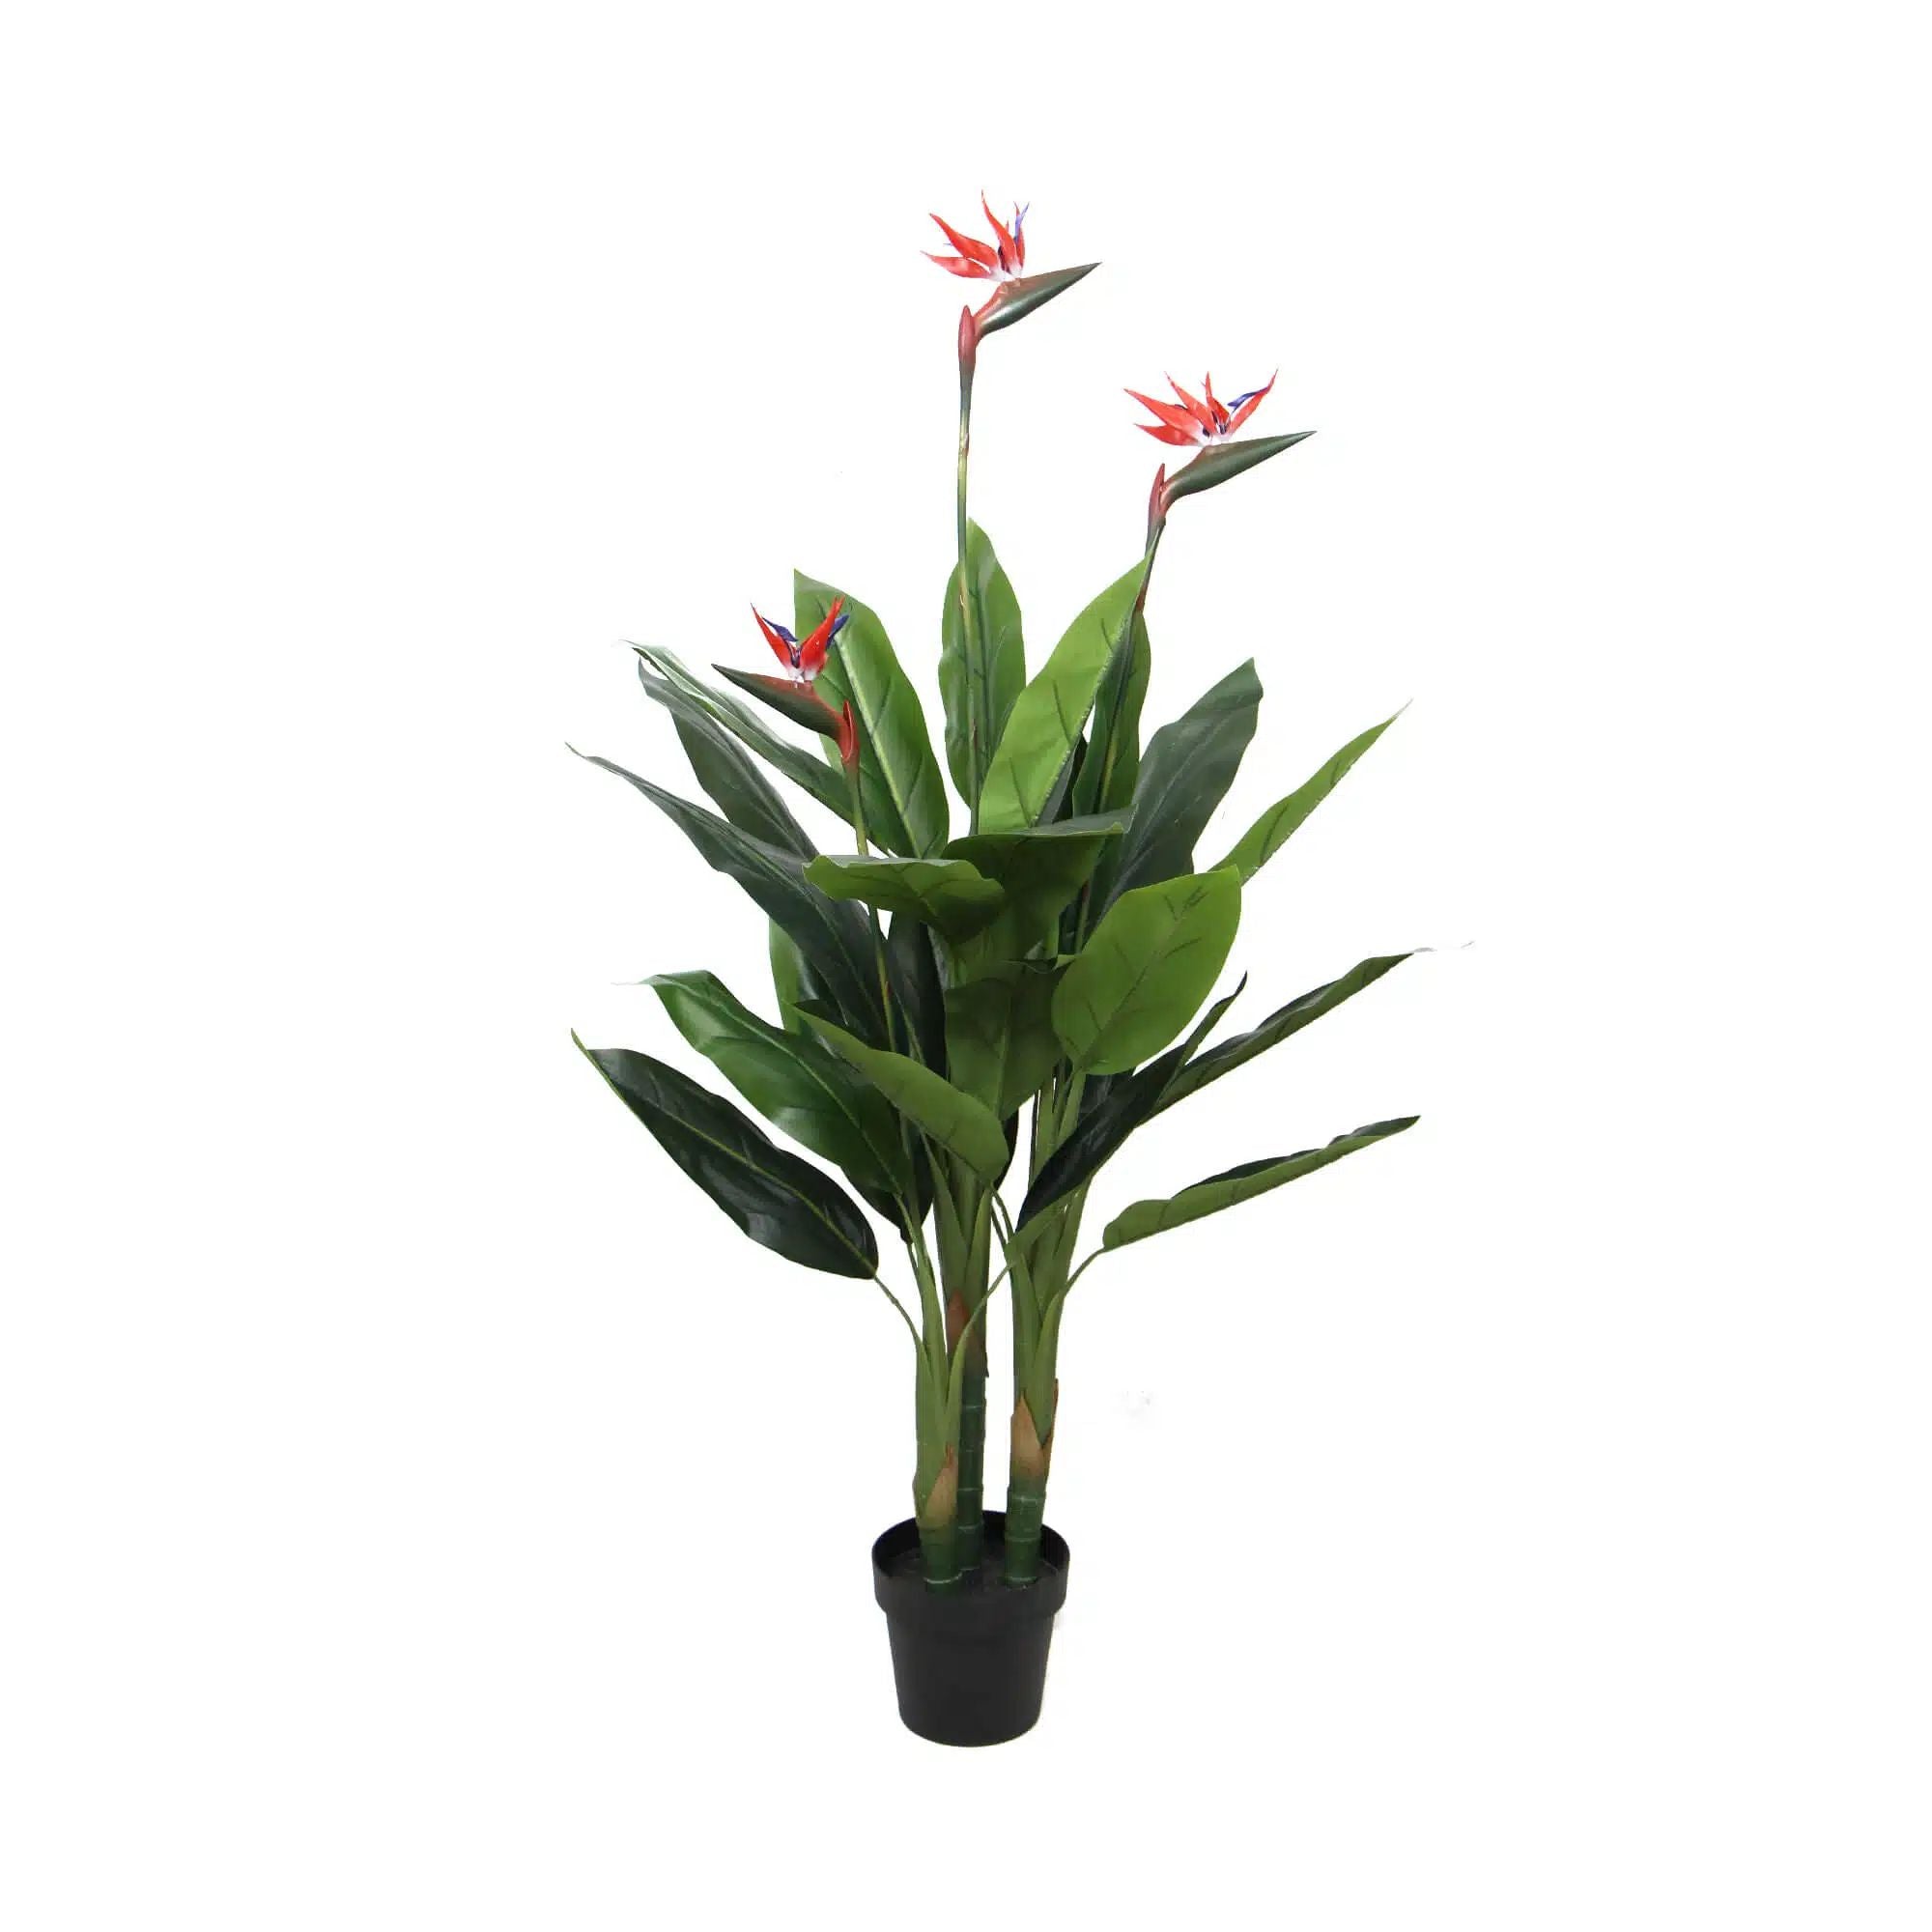 artificial-bird-of-paradise-plant-150cm-red-flowers-474657.jpg